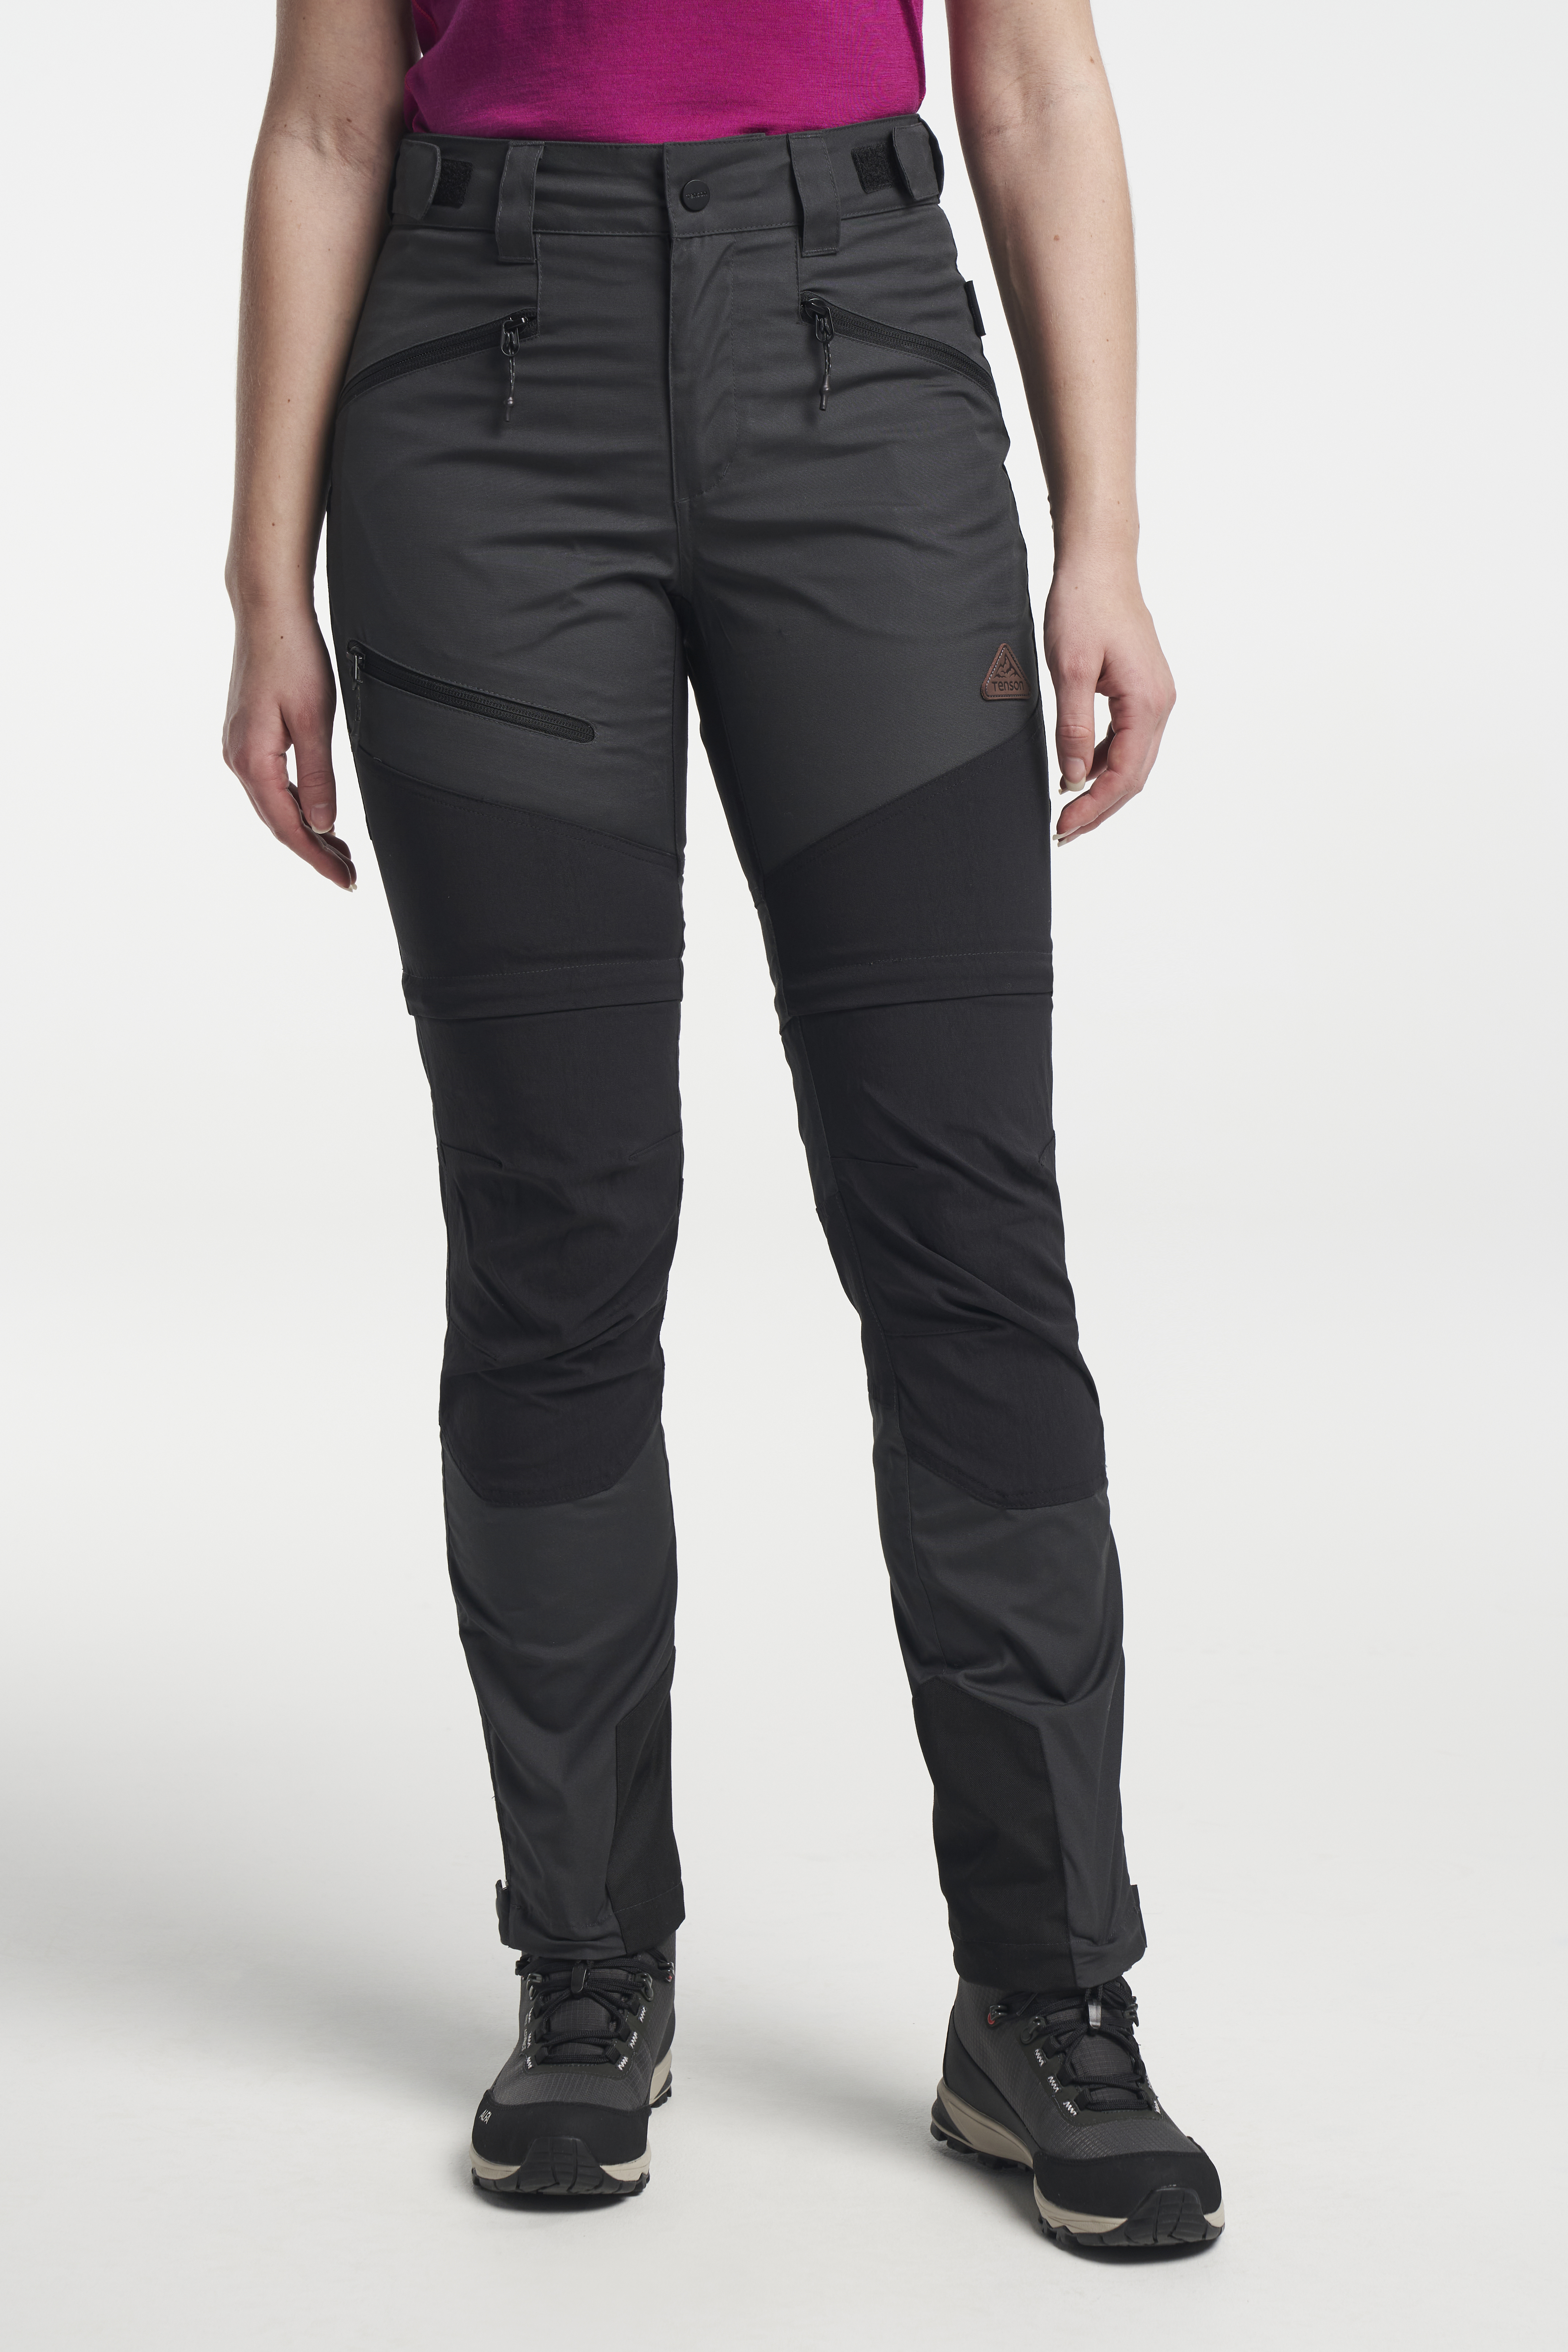 Convertible Travel Pants for Women: Pack them or forget them?